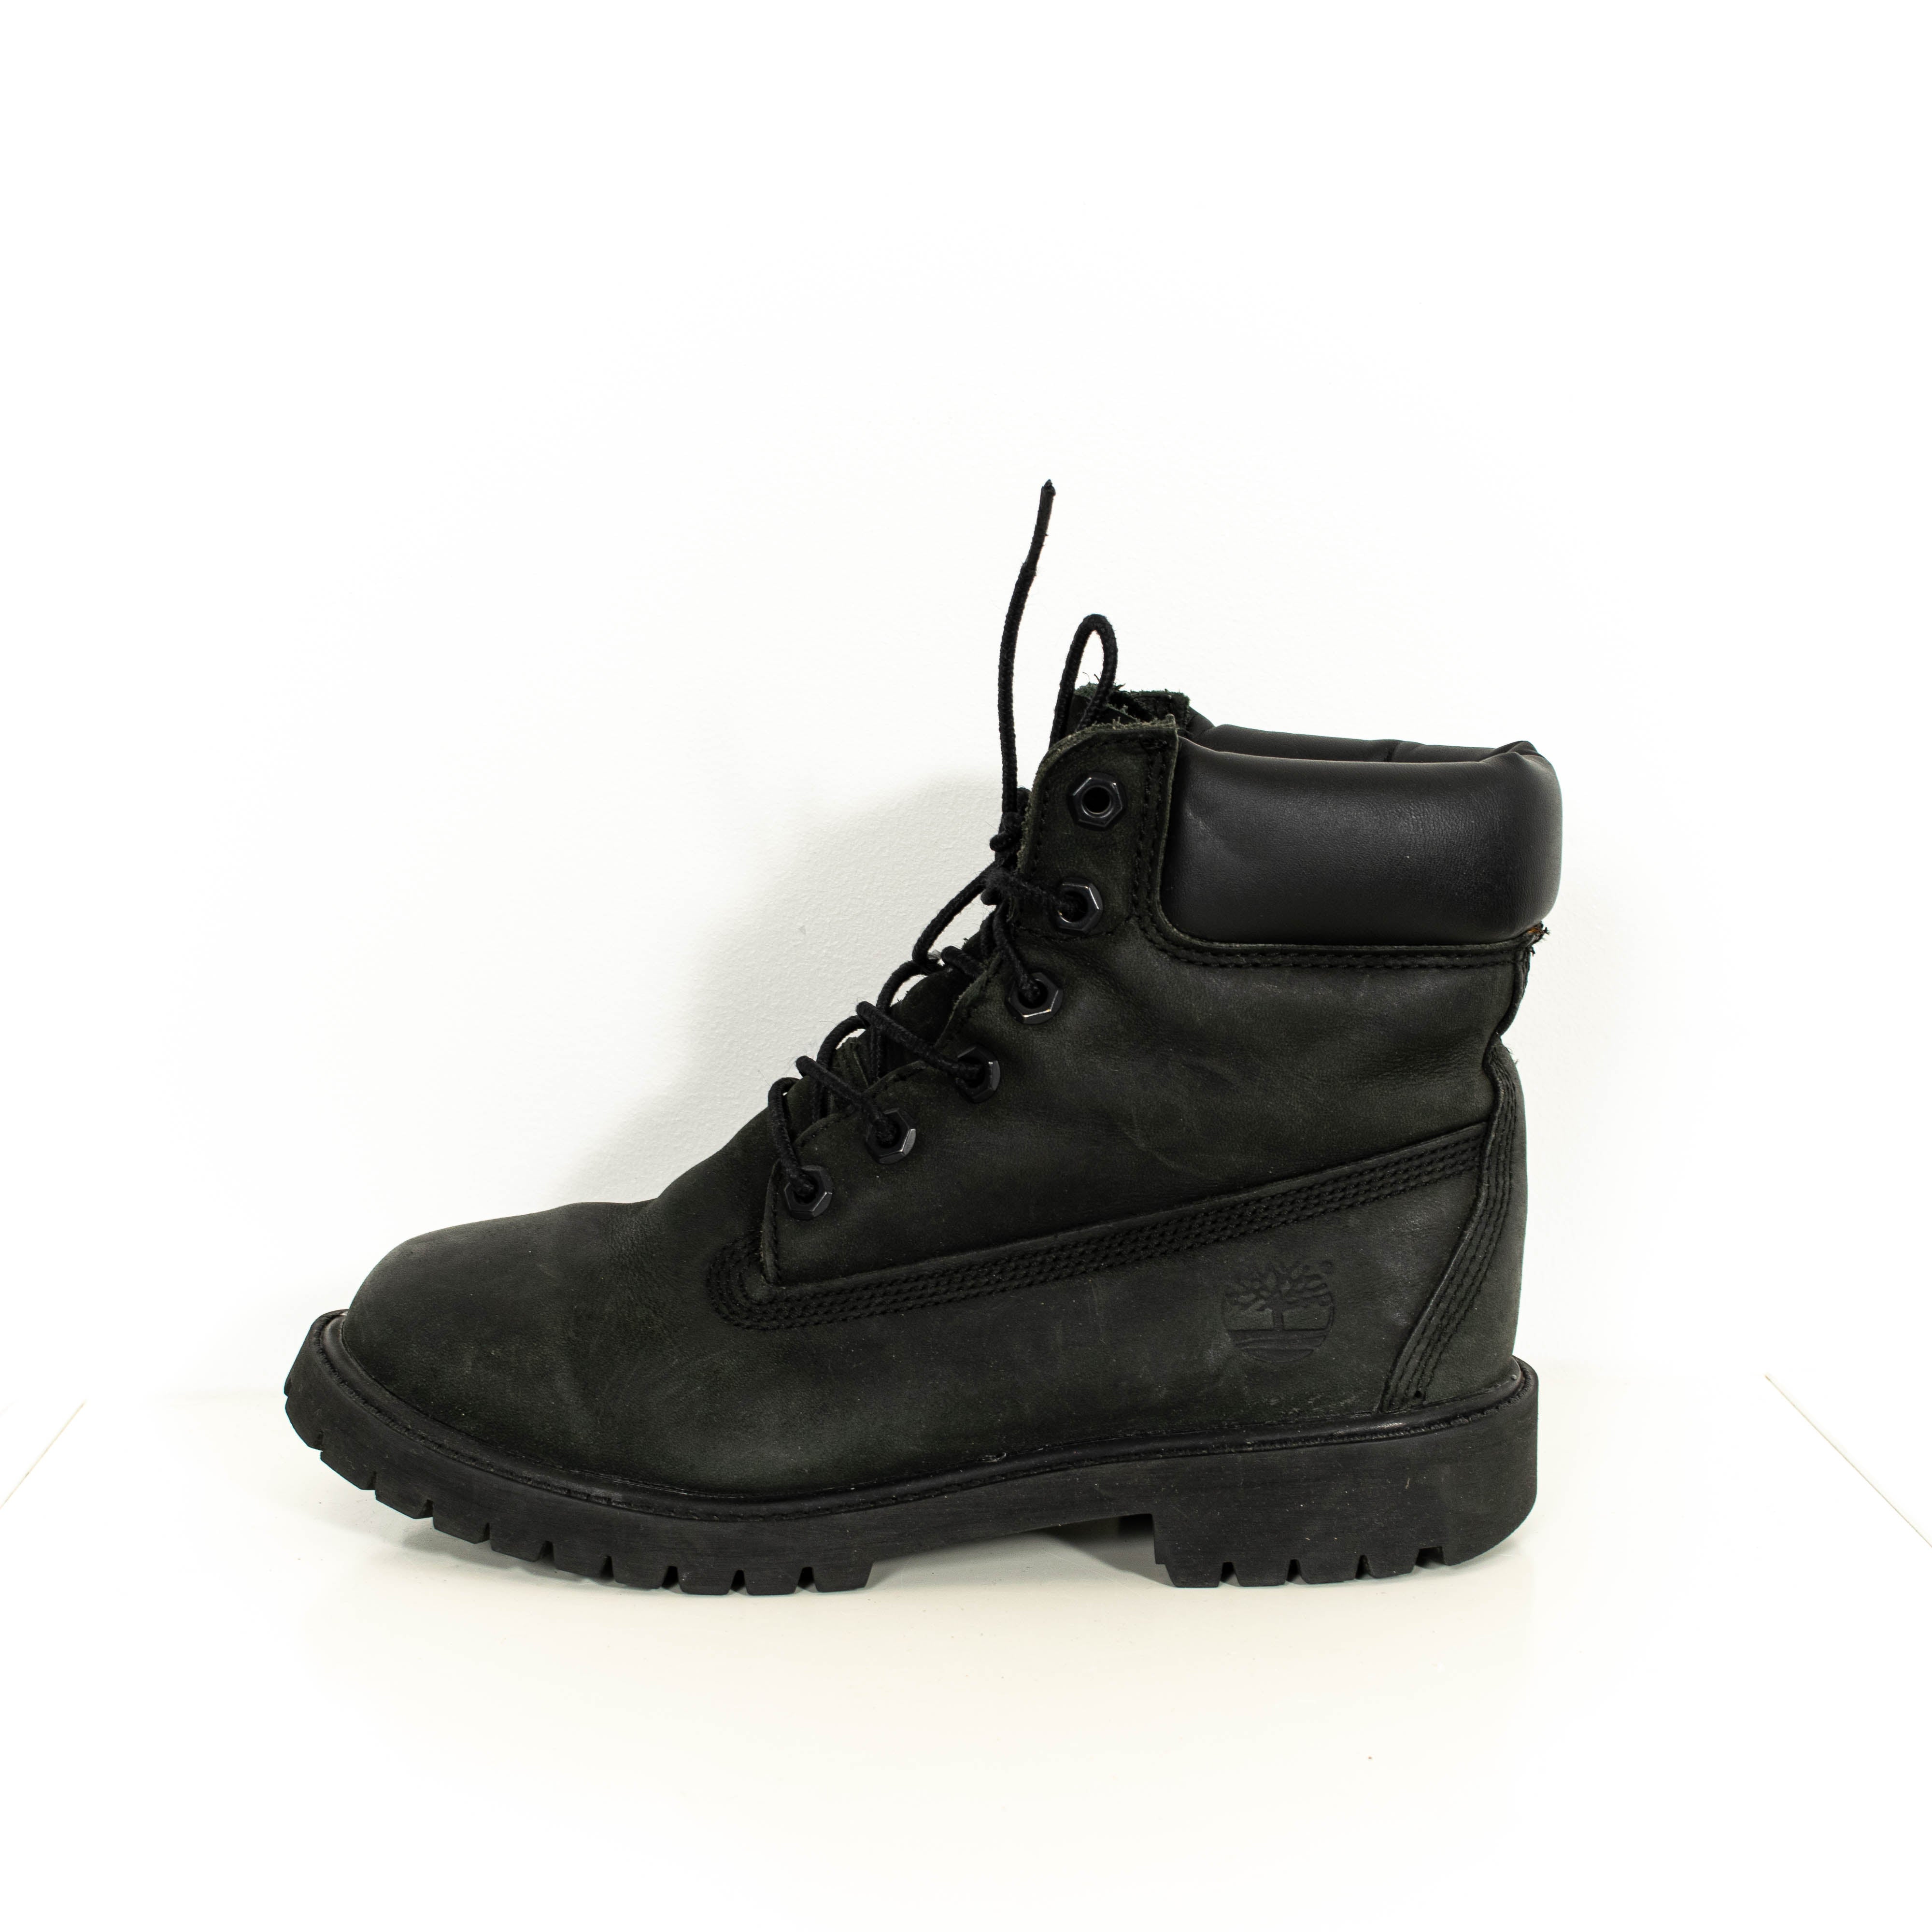 Timberland Hi-Top Black Leather Lace Up Winter Boots Womens EU37